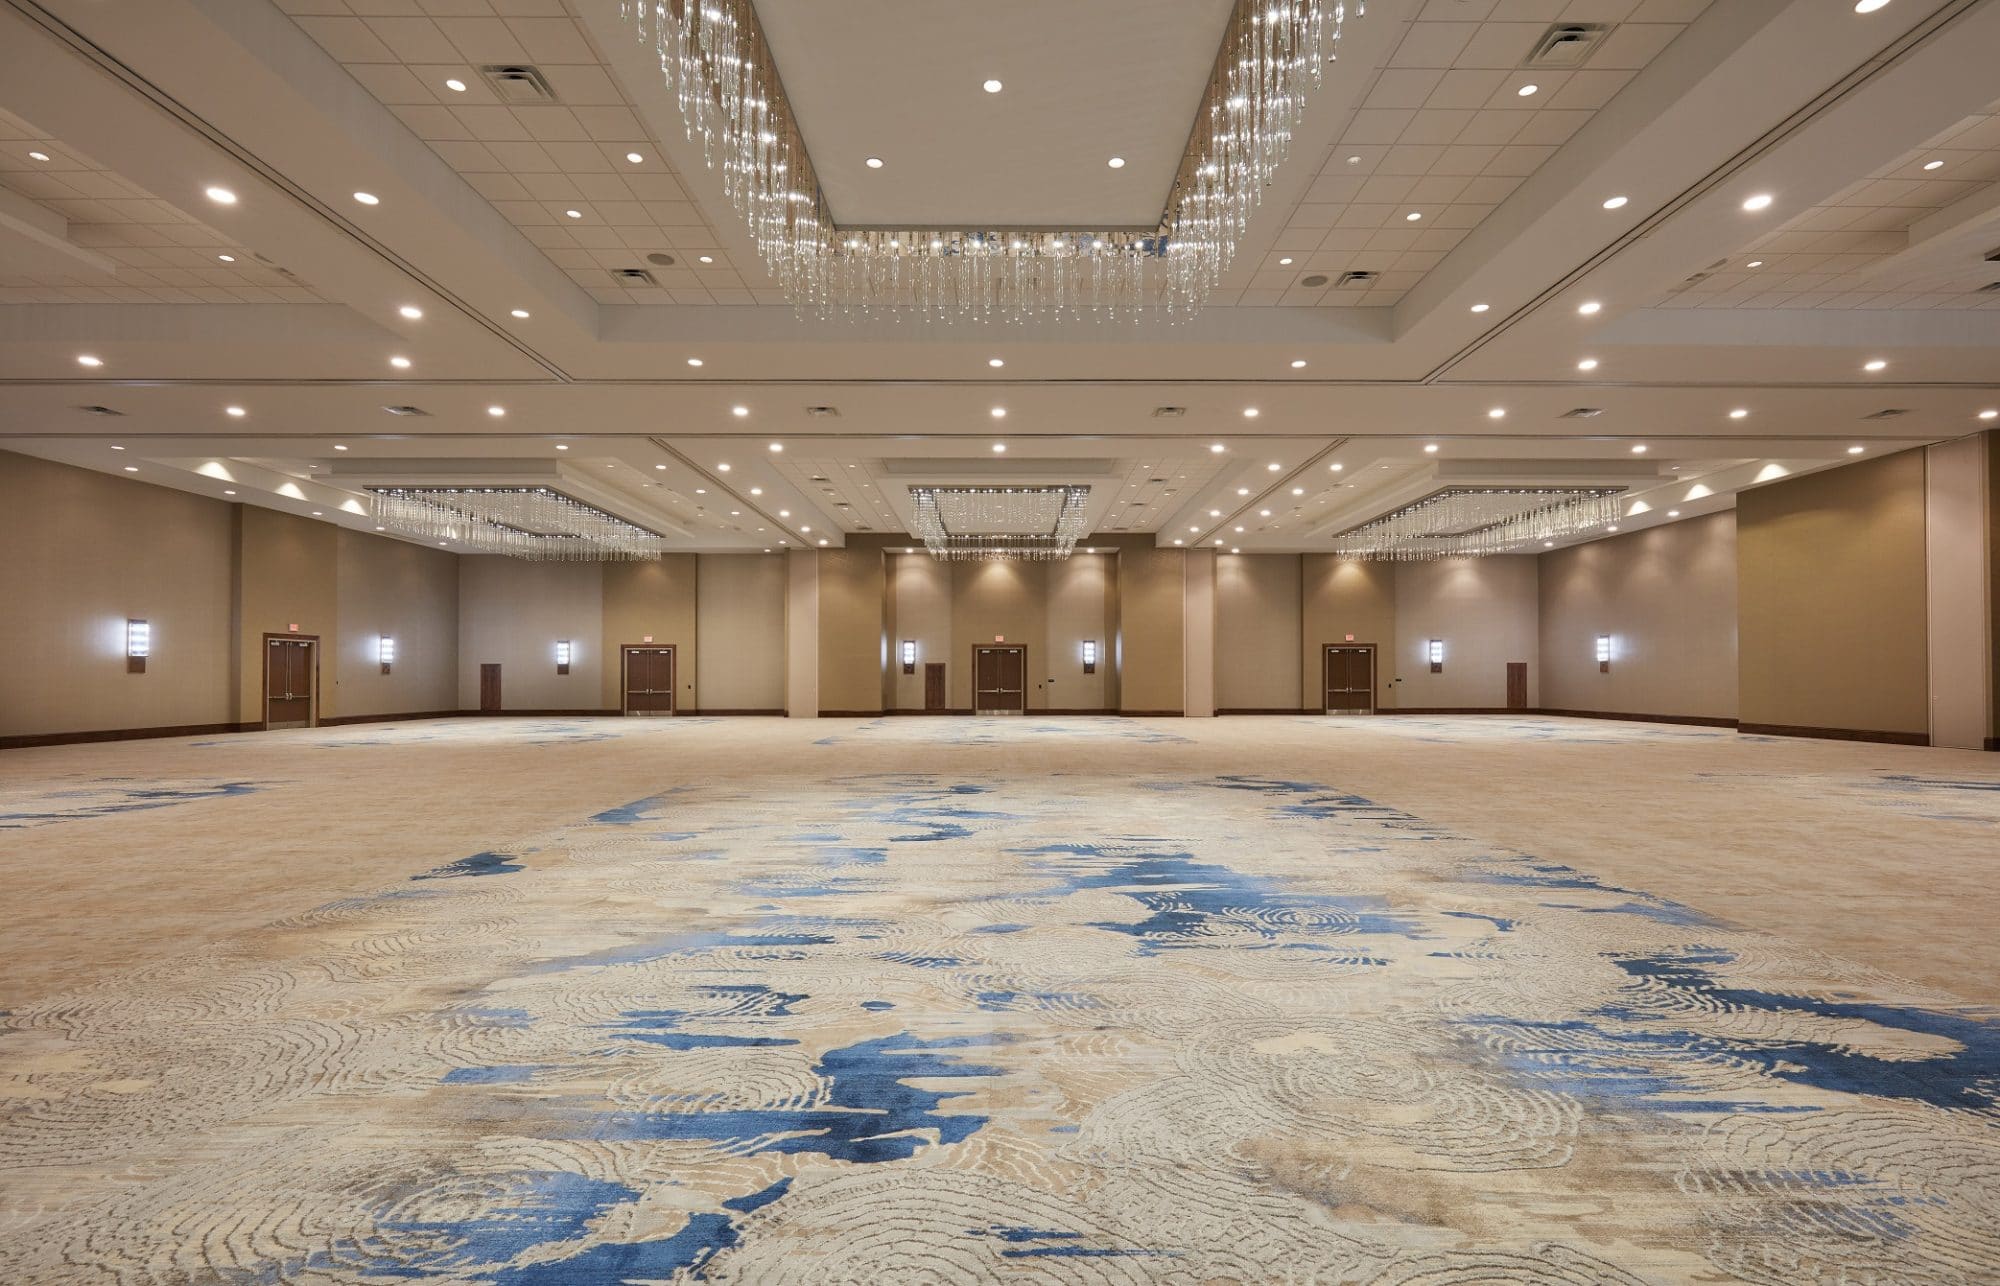 DoubleTree Orlando Sea World - large ballroom with plenty of space for large parties